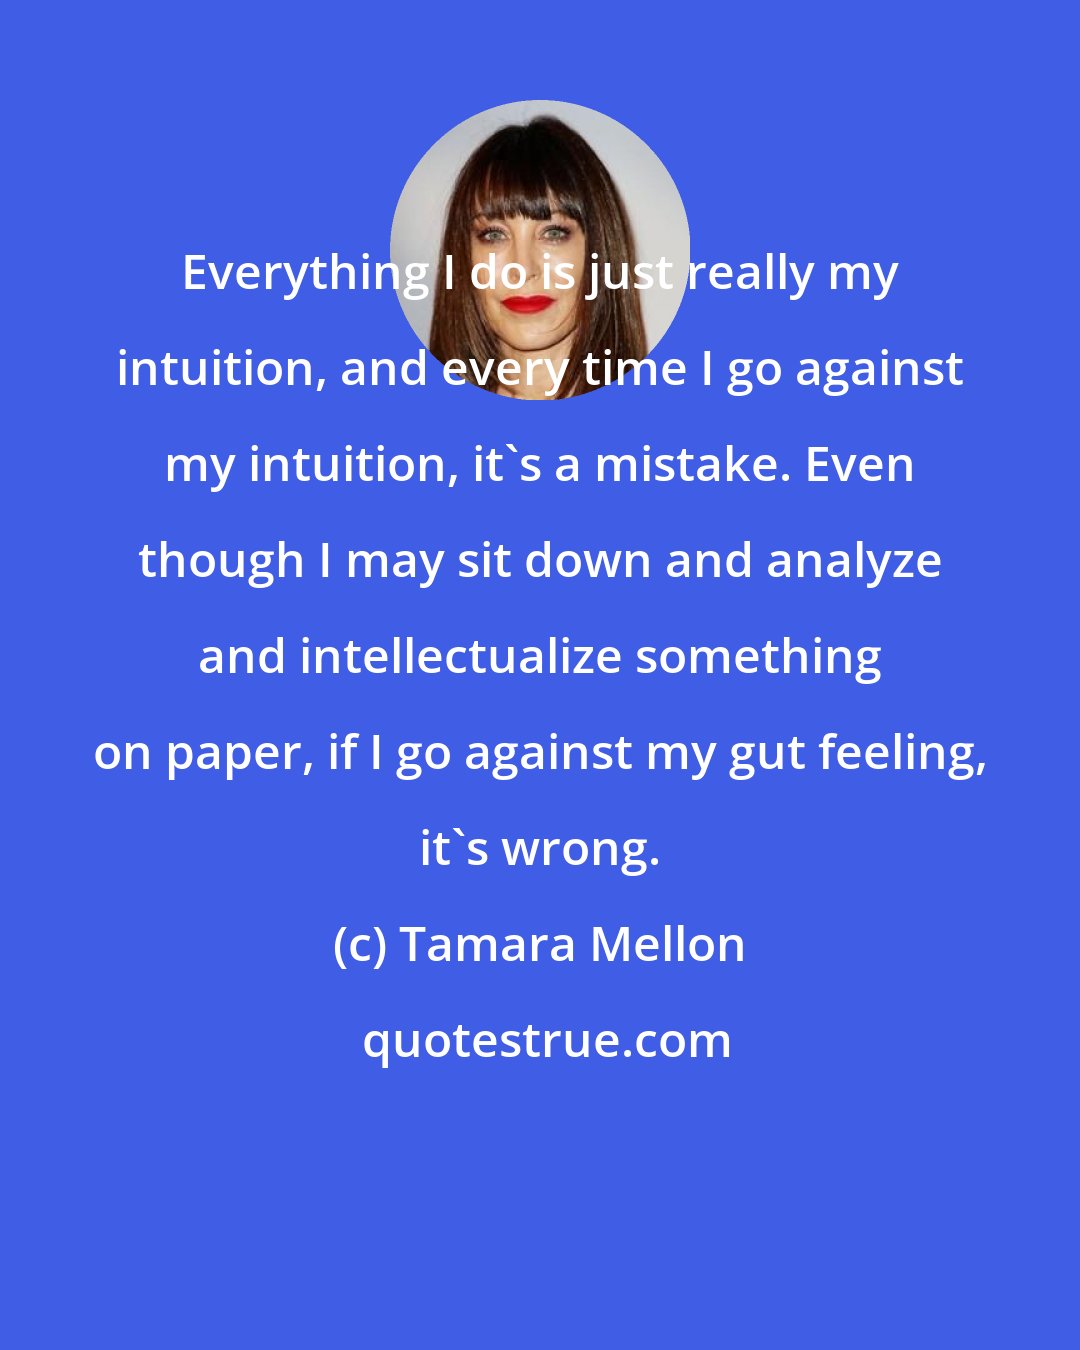 Tamara Mellon: Everything I do is just really my intuition, and every time I go against my intuition, it's a mistake. Even though I may sit down and analyze and intellectualize something on paper, if I go against my gut feeling, it's wrong.